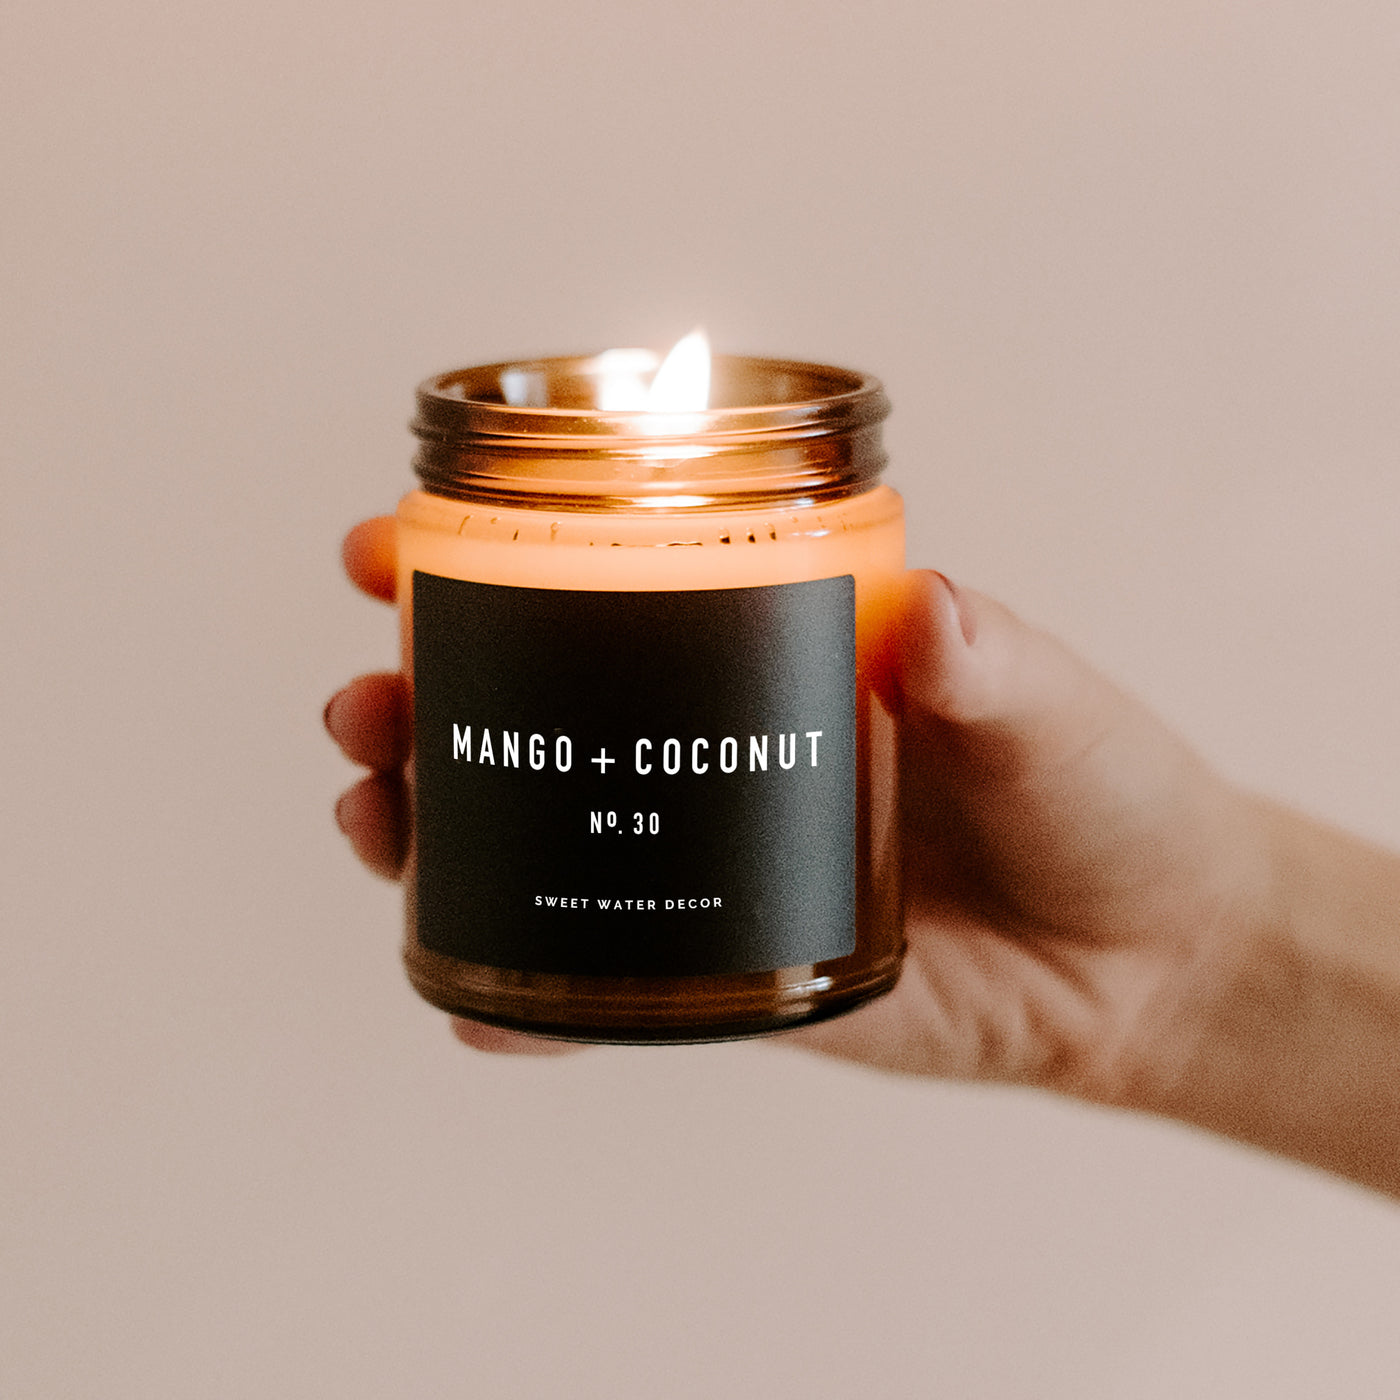 Mango and Coconut Soy Candle - Amber Jar - 9 oz